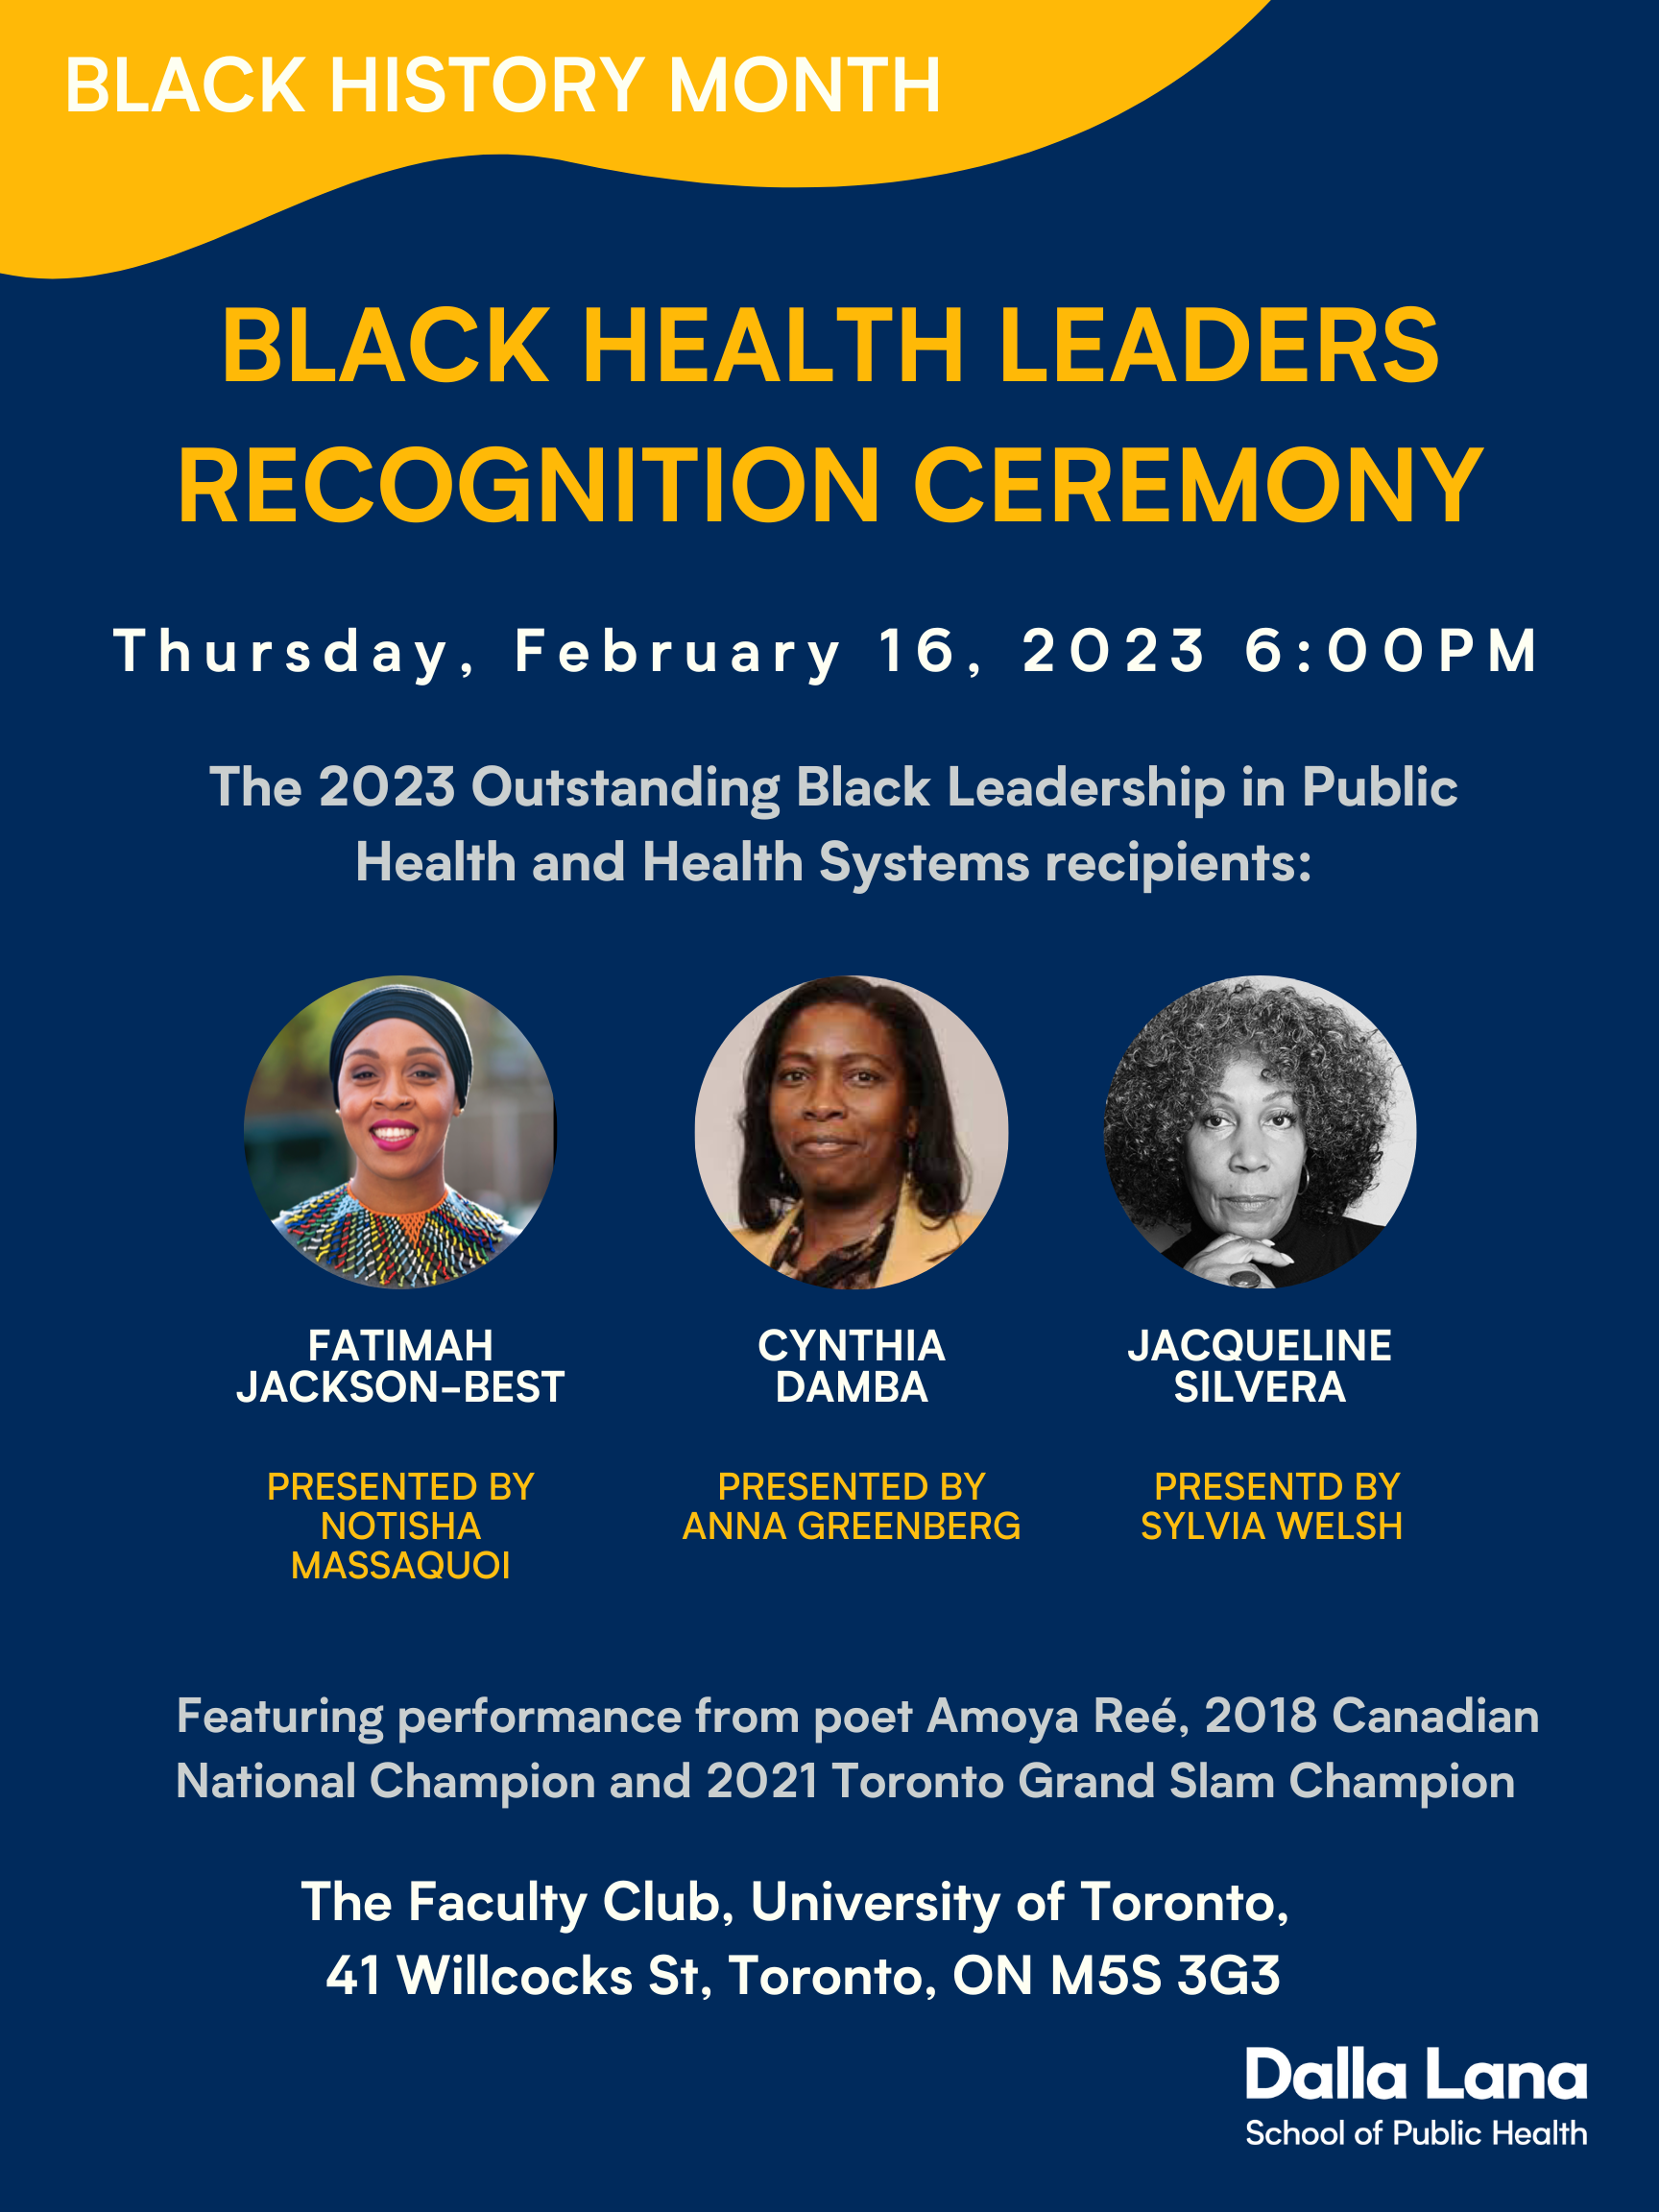 Black History Month events celebrate leadership and excellence - Dalla Lana  School of Public Health